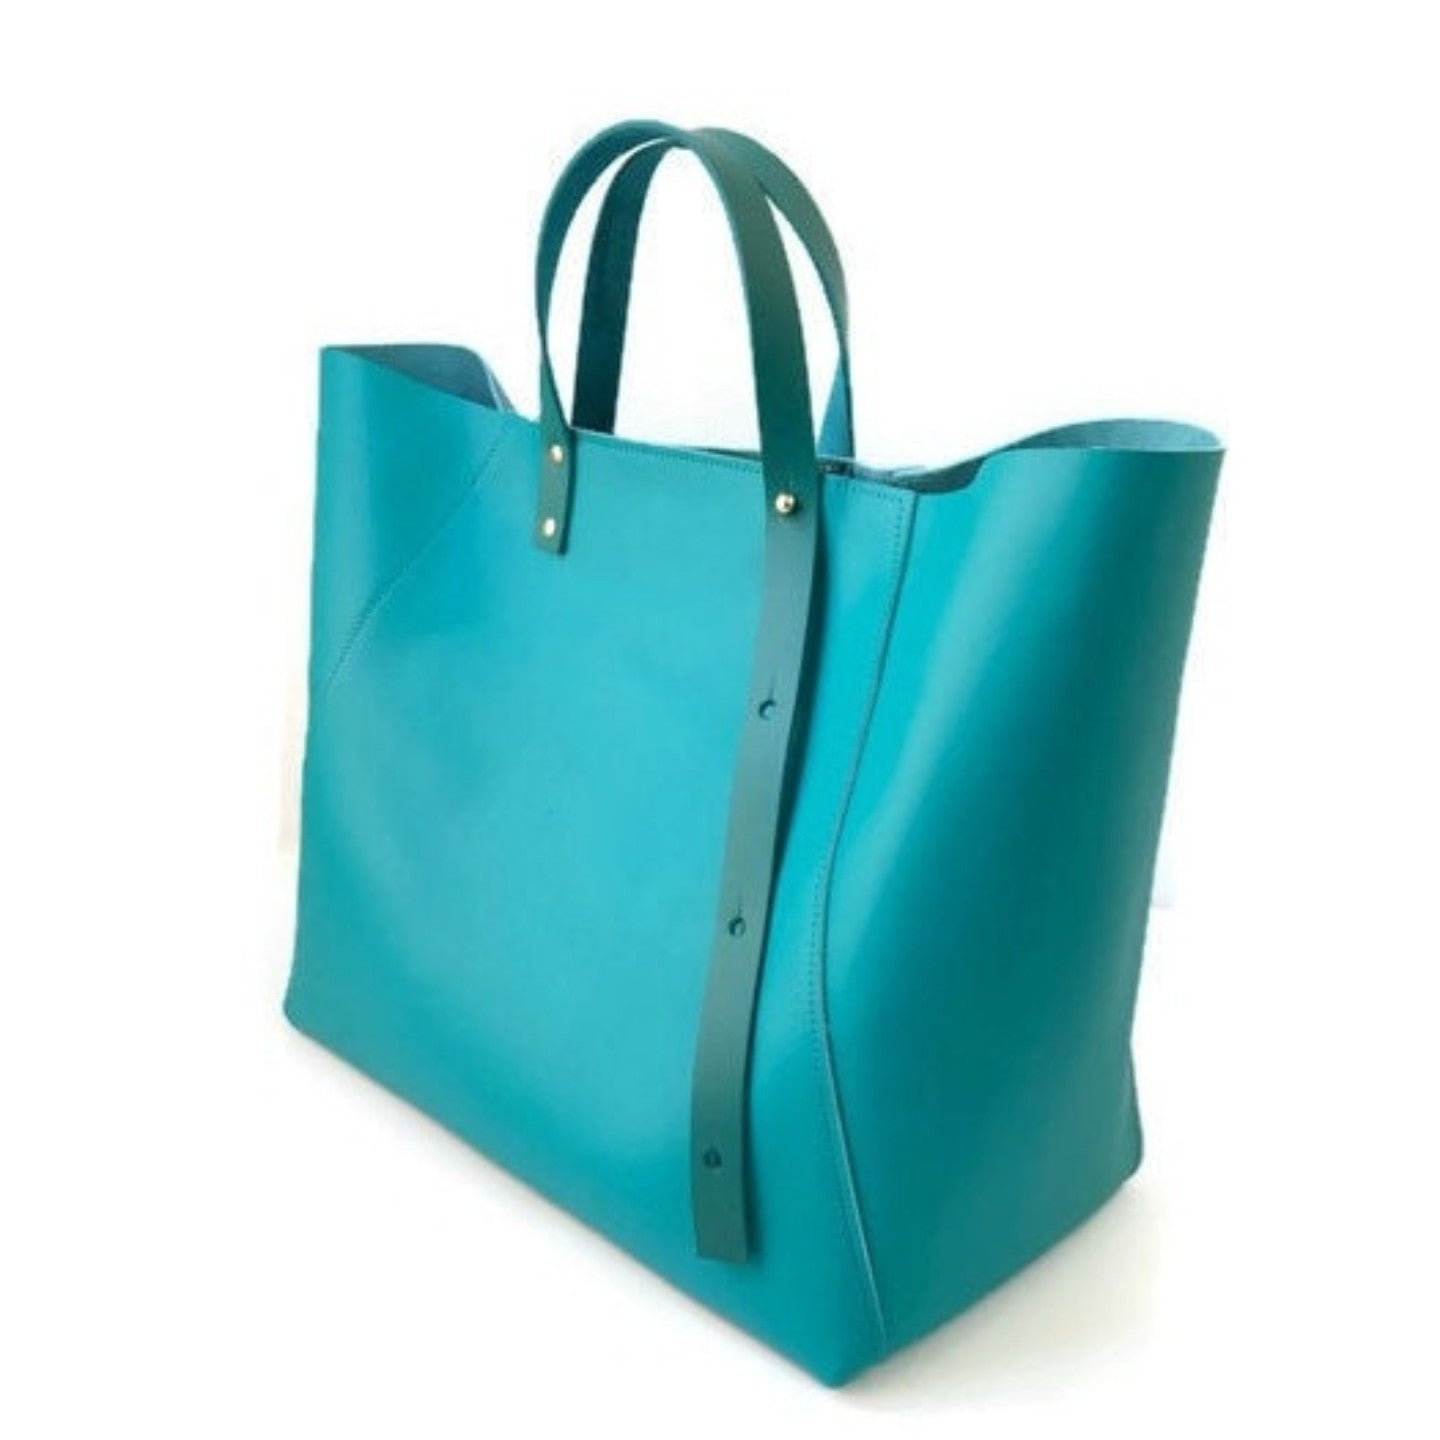 A-Line Tote in Turquoise